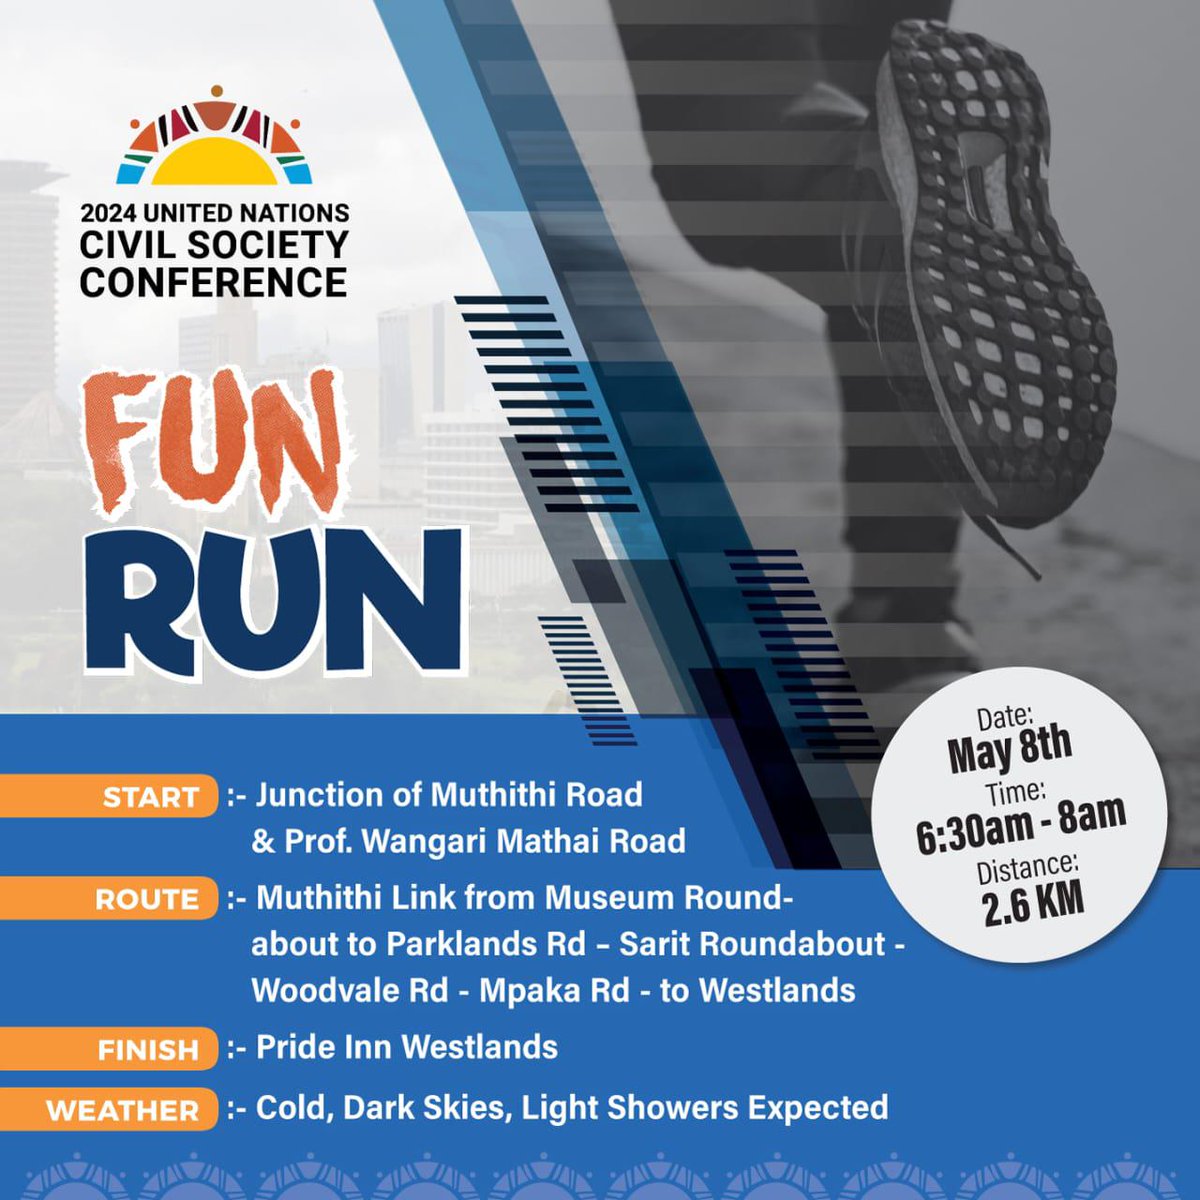 📢Get ready to tackle the #2024UnitedNationsCivilSociety with some high energy vibes! 💪Lace up your sneakers & sprint with us tomorrow morning for a #funrun, where we'll crush those calories. 🗓️Mark your calendar, sync your watches & let's smash this fitness challenge.